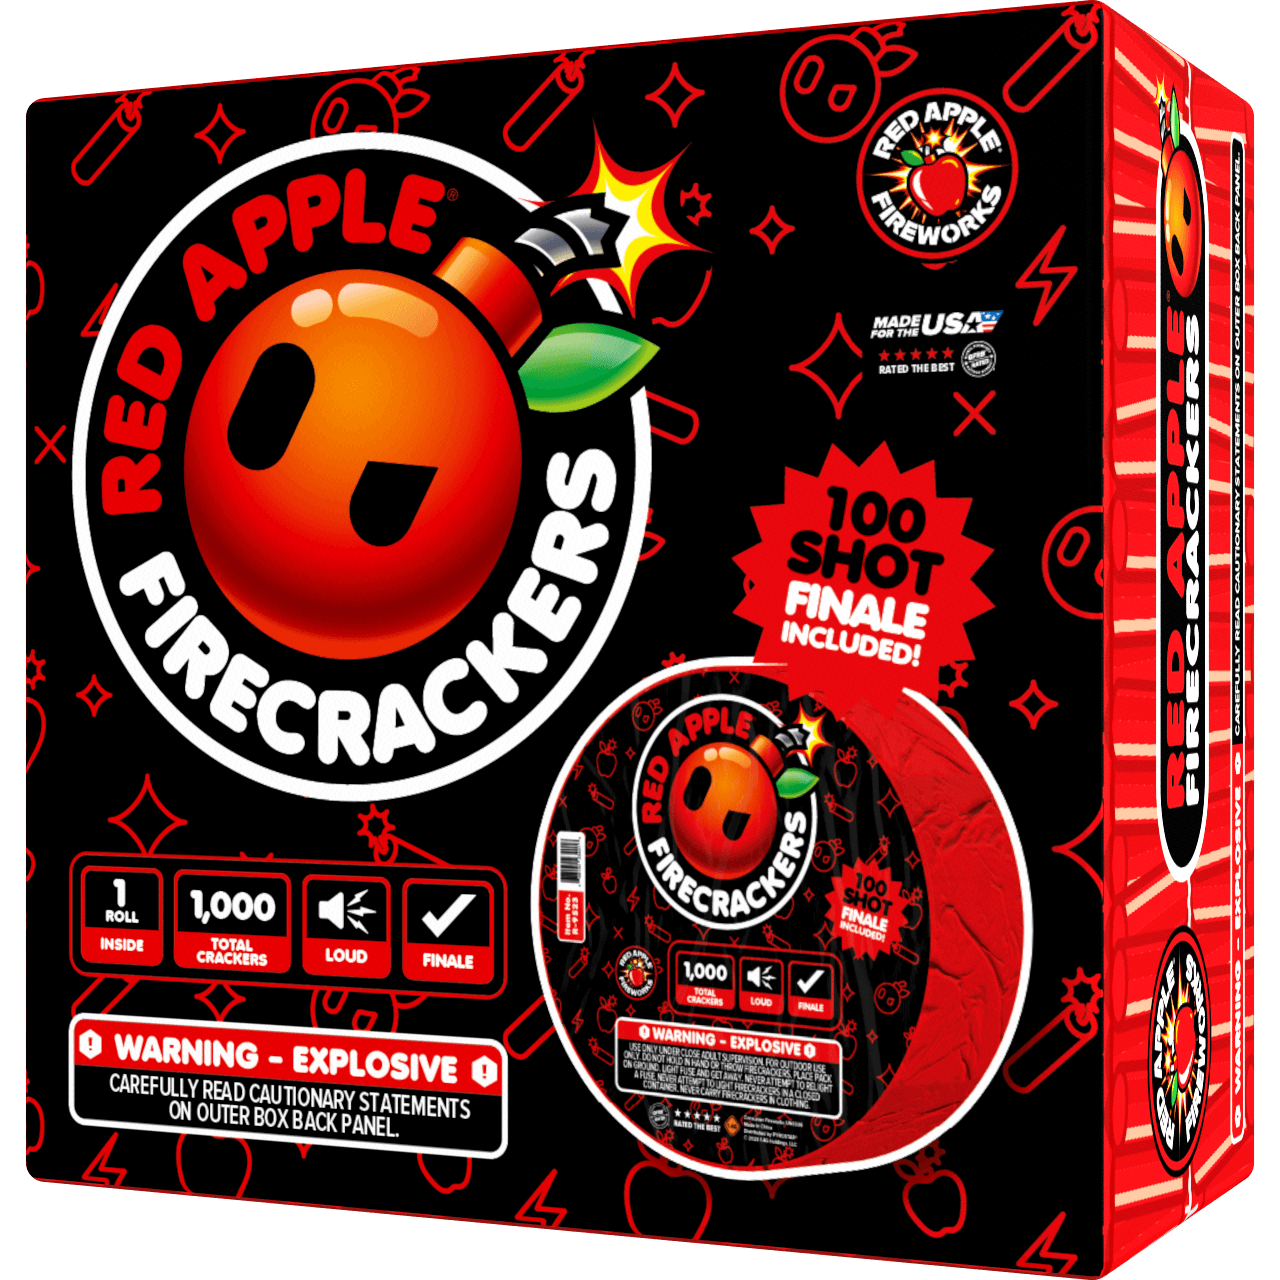 Red Apple® Bombs 1,000 Roll Flash Crackers with 100 Shot Finale